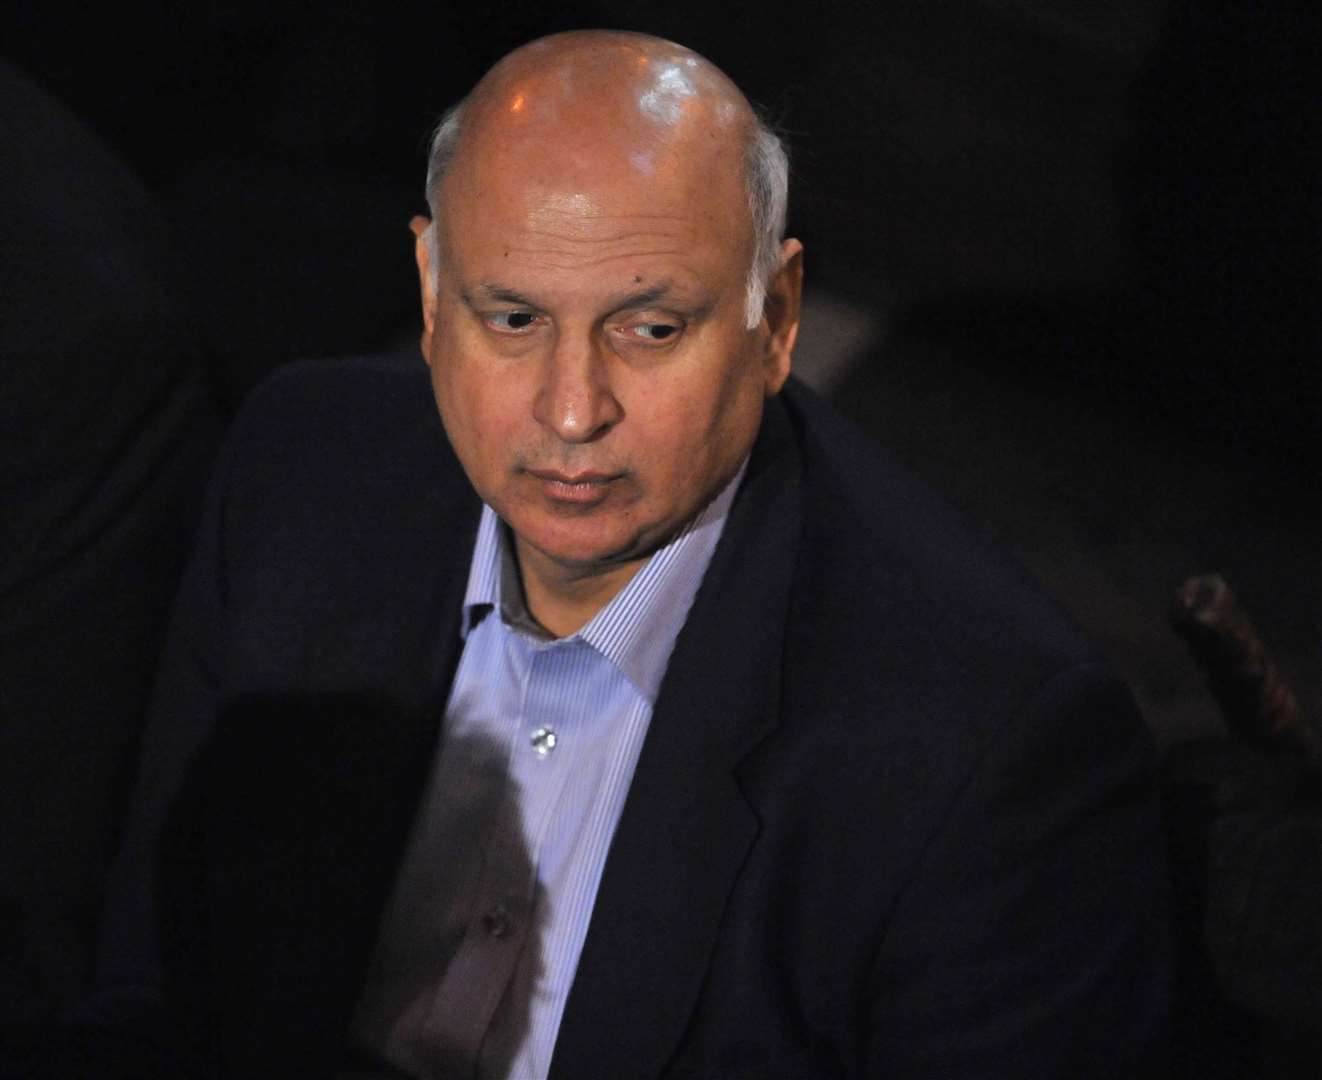 Former MP Mohammed Sarwar was the UK’s first Muslim MP (Jamie Simpson/PA)